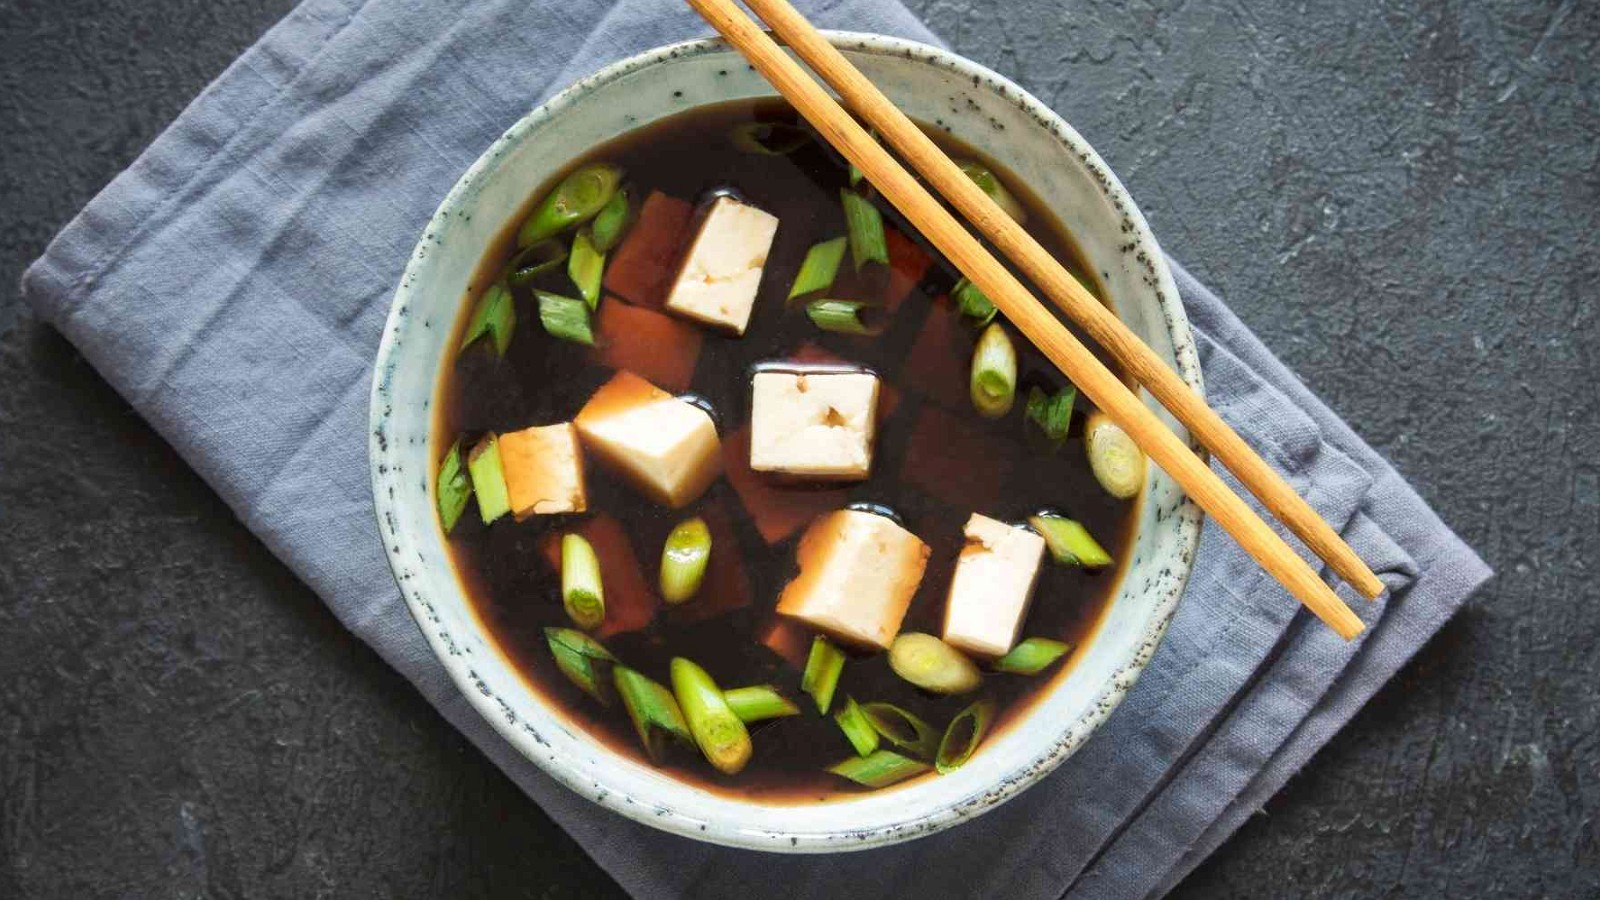 Image of Miso Soup